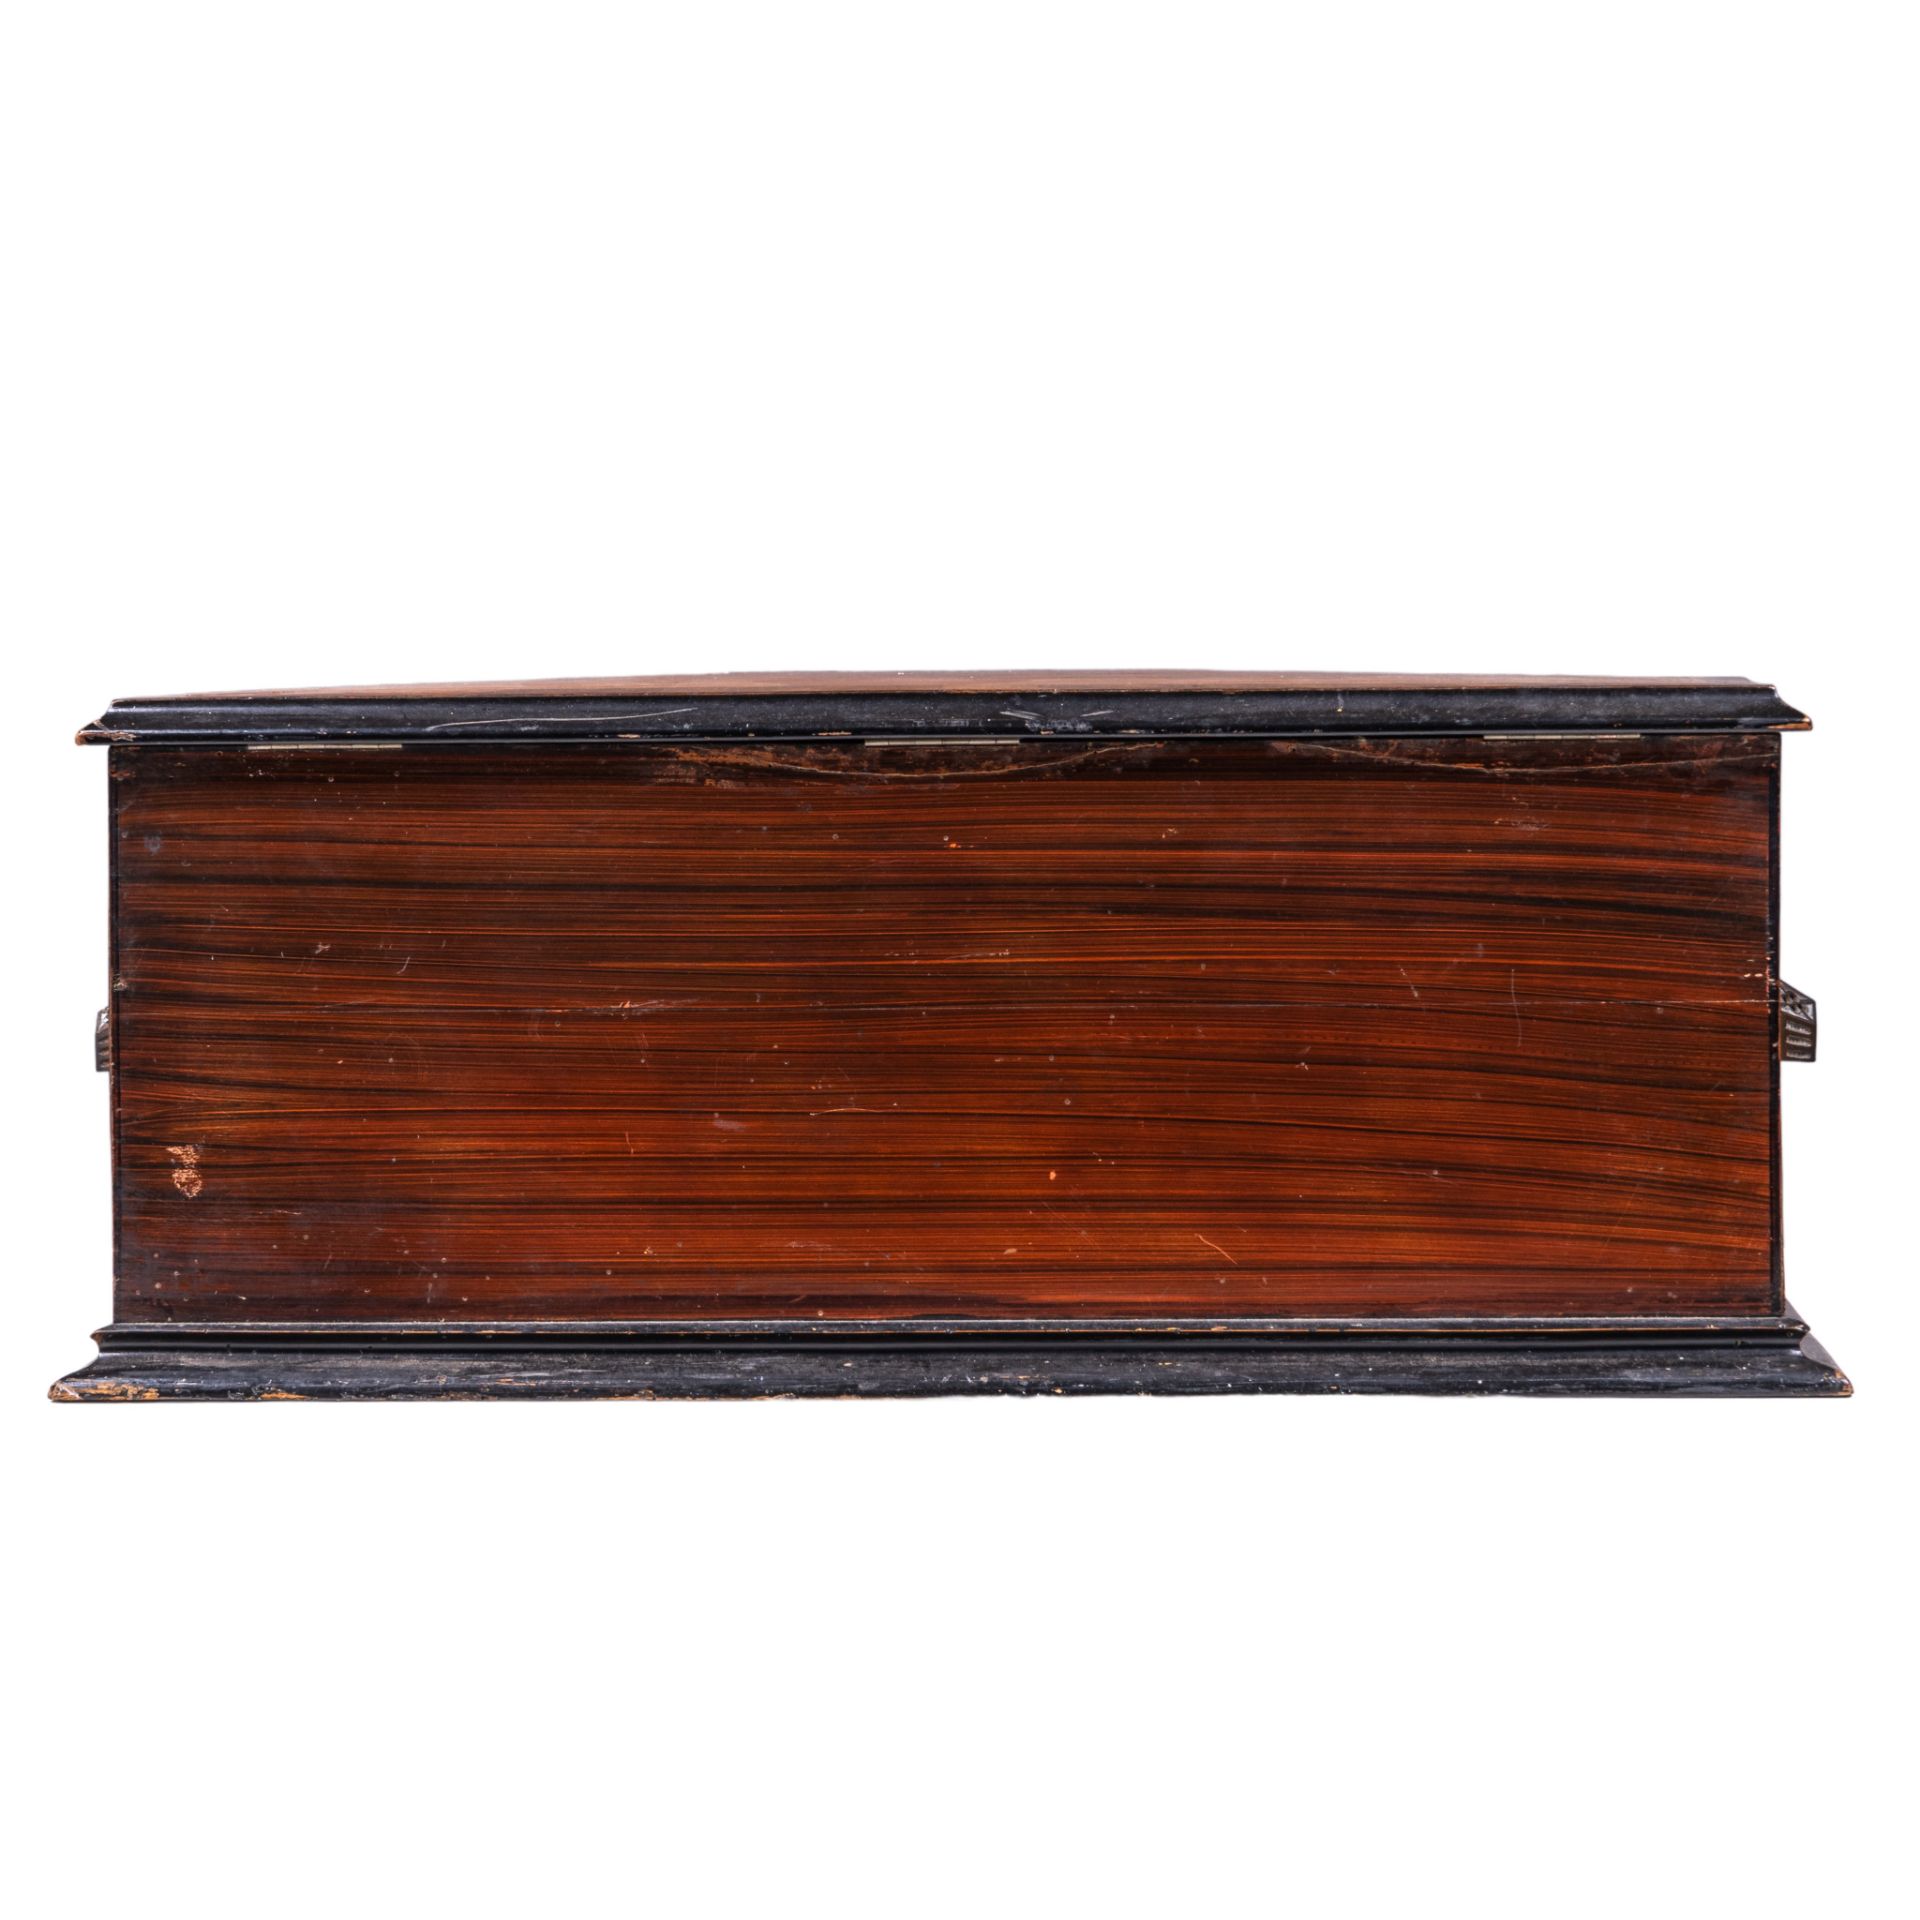 A Victorian mahogany and rosewood veneered cylinder musical box, 1920s, H 28,5 - W 70- D 37 cm - Image 4 of 10